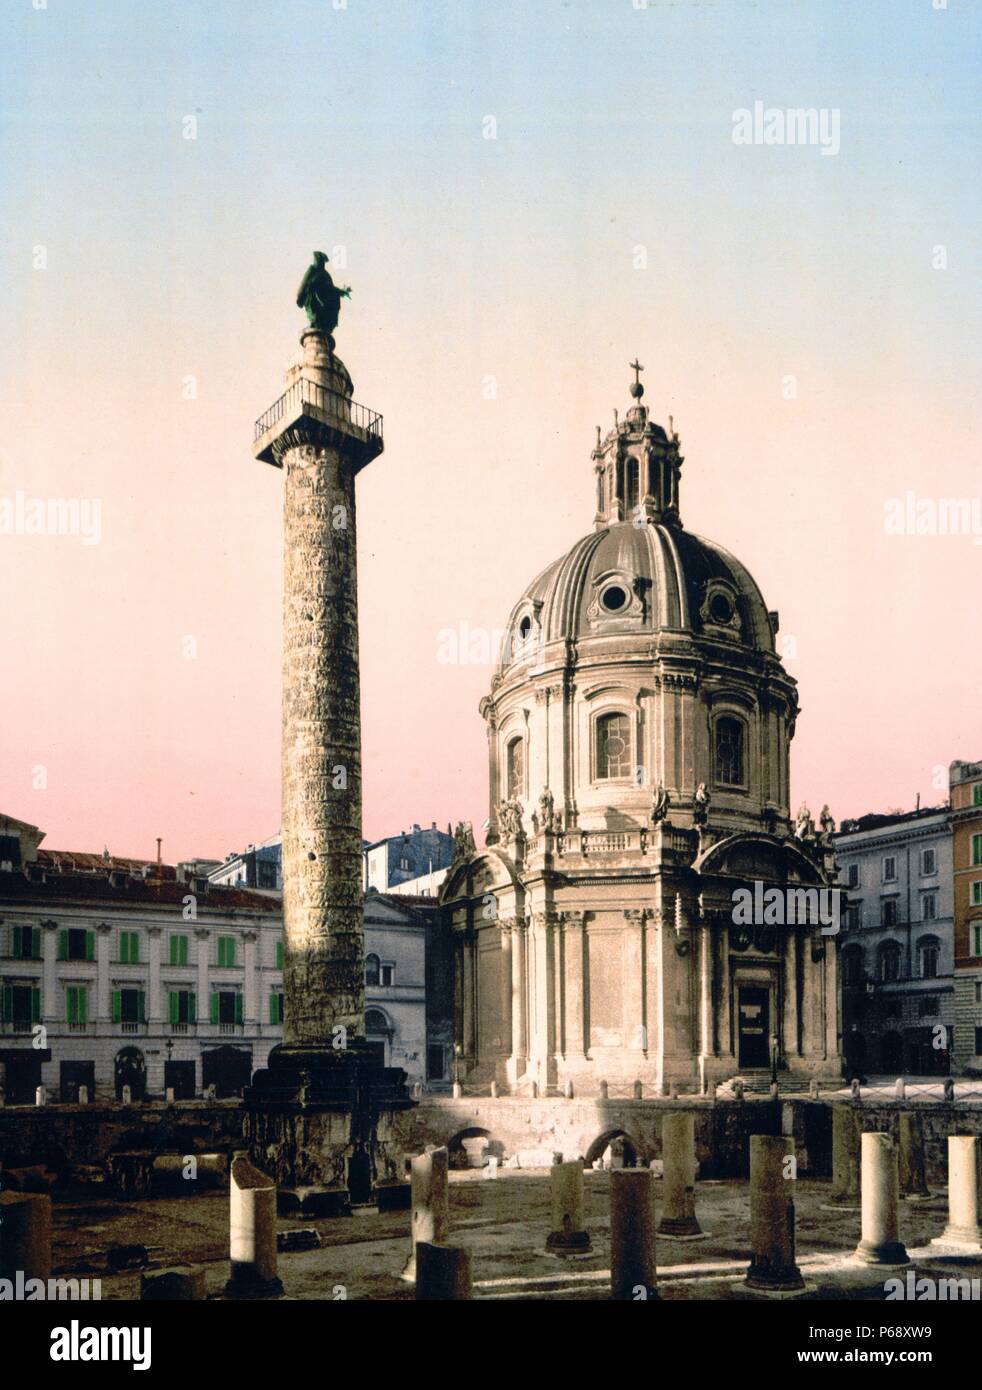 Colour photograph of Trajan's Column, a Roman triumphal column in Rome, commemorating the Roman emperor Trajan's victory in the Dacian Wars. Dated 1900 Stock Photo